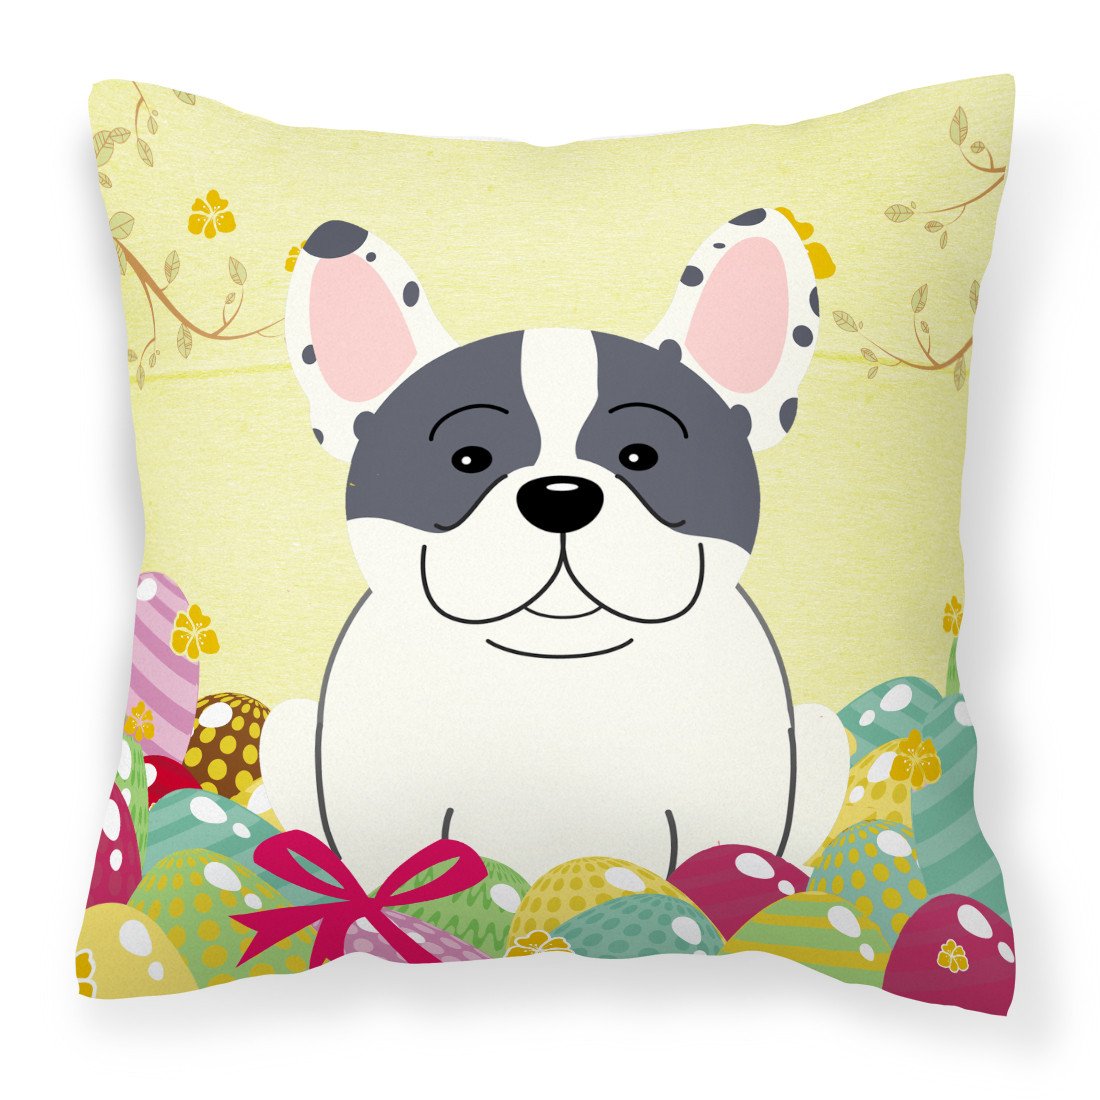 Easter Eggs French Bulldog Piebald Fabric Decorative Pillow BB6011PW1818 by Caroline's Treasures